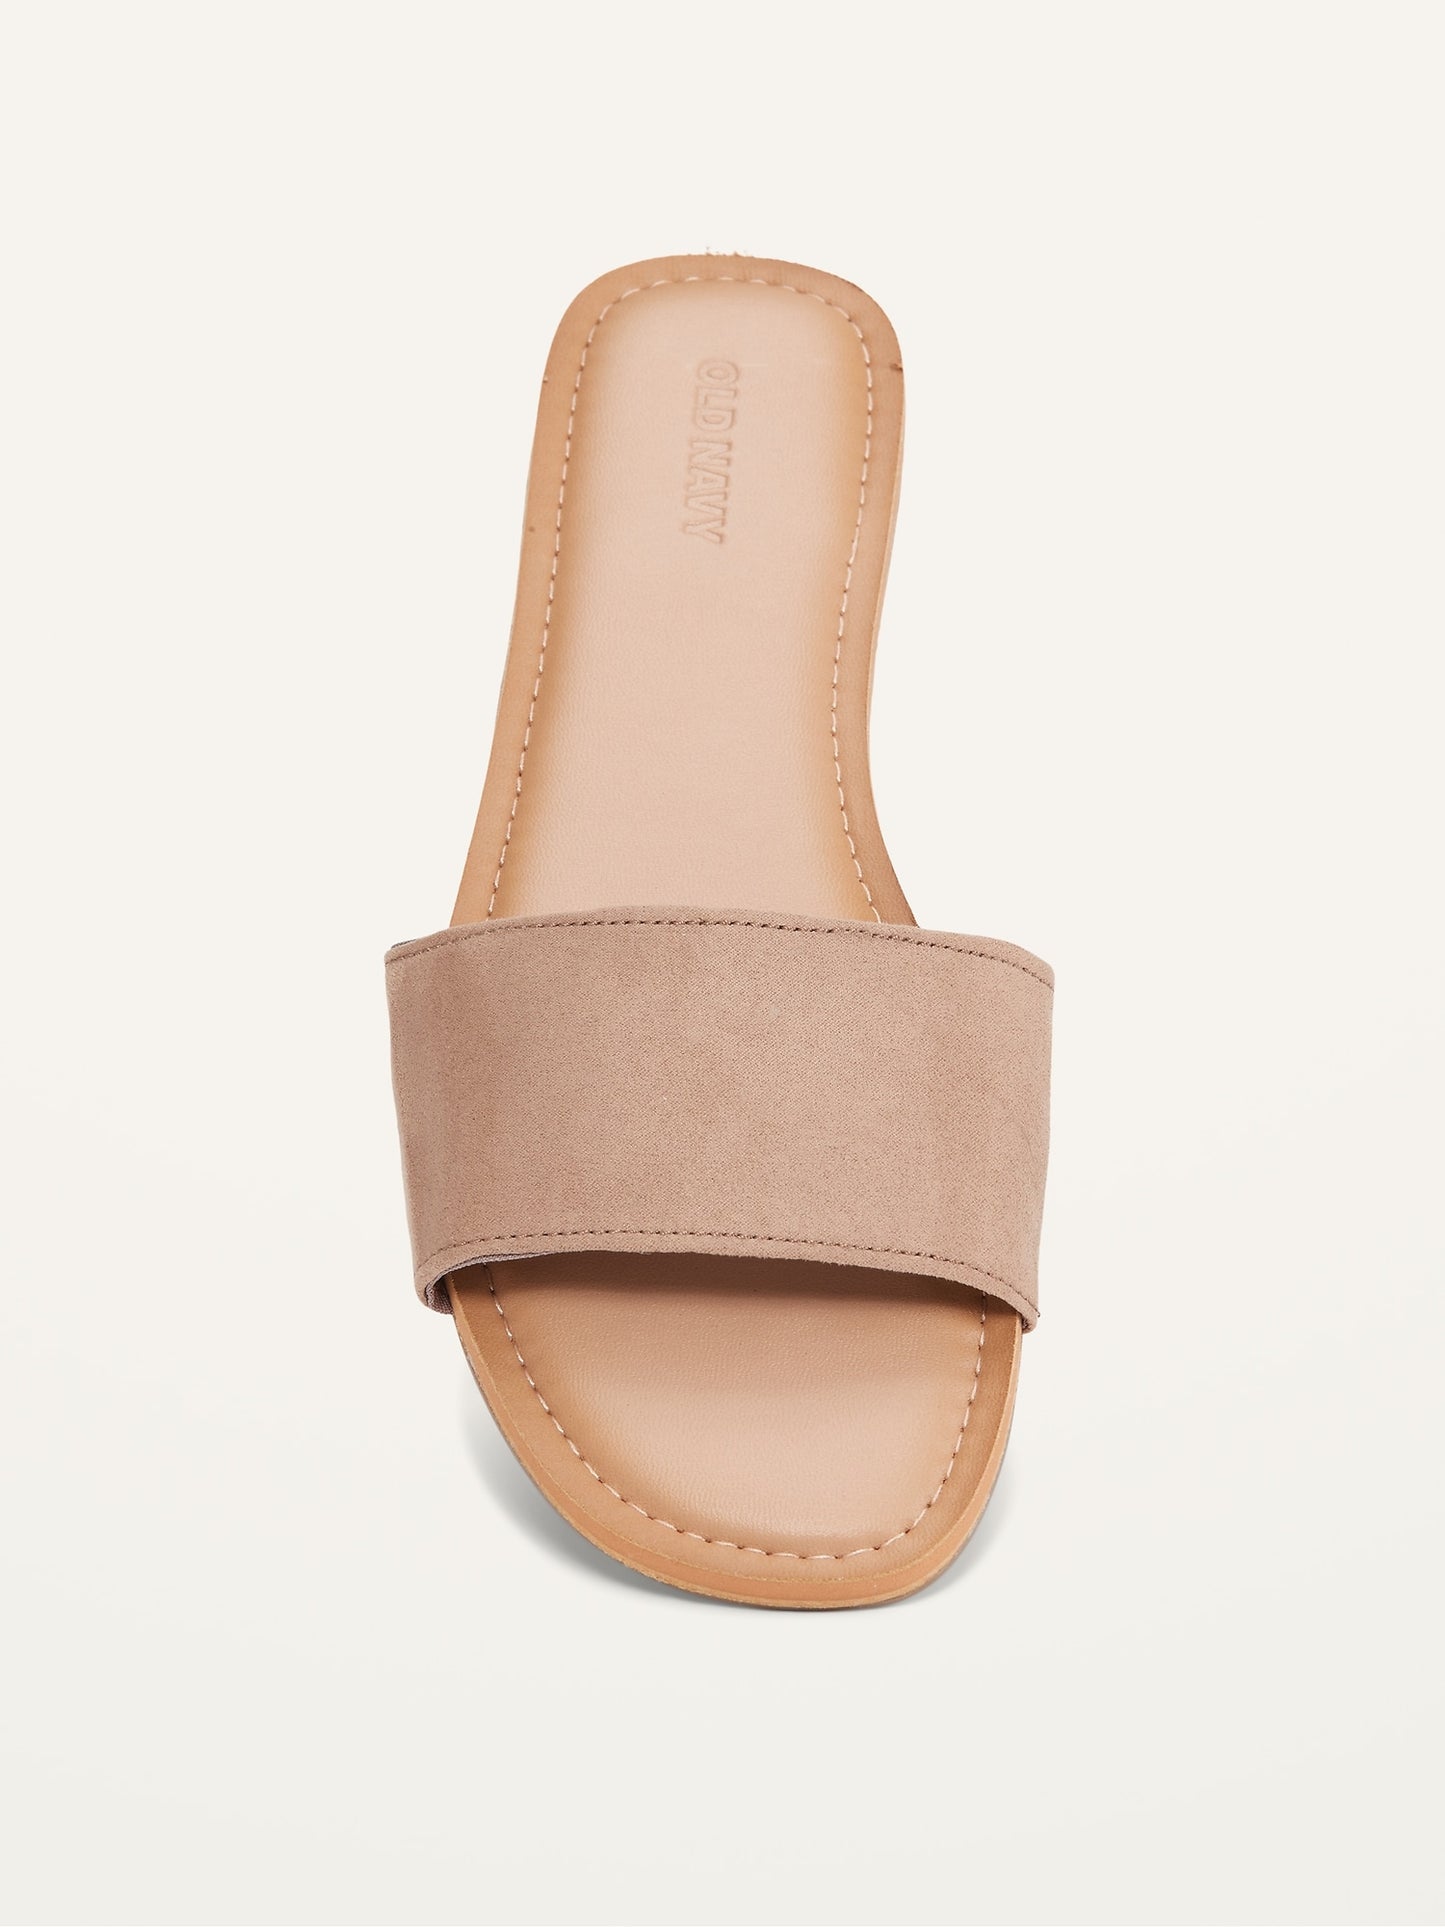 ON Faux-Suede Slide Sandals For Women - Light Taupe